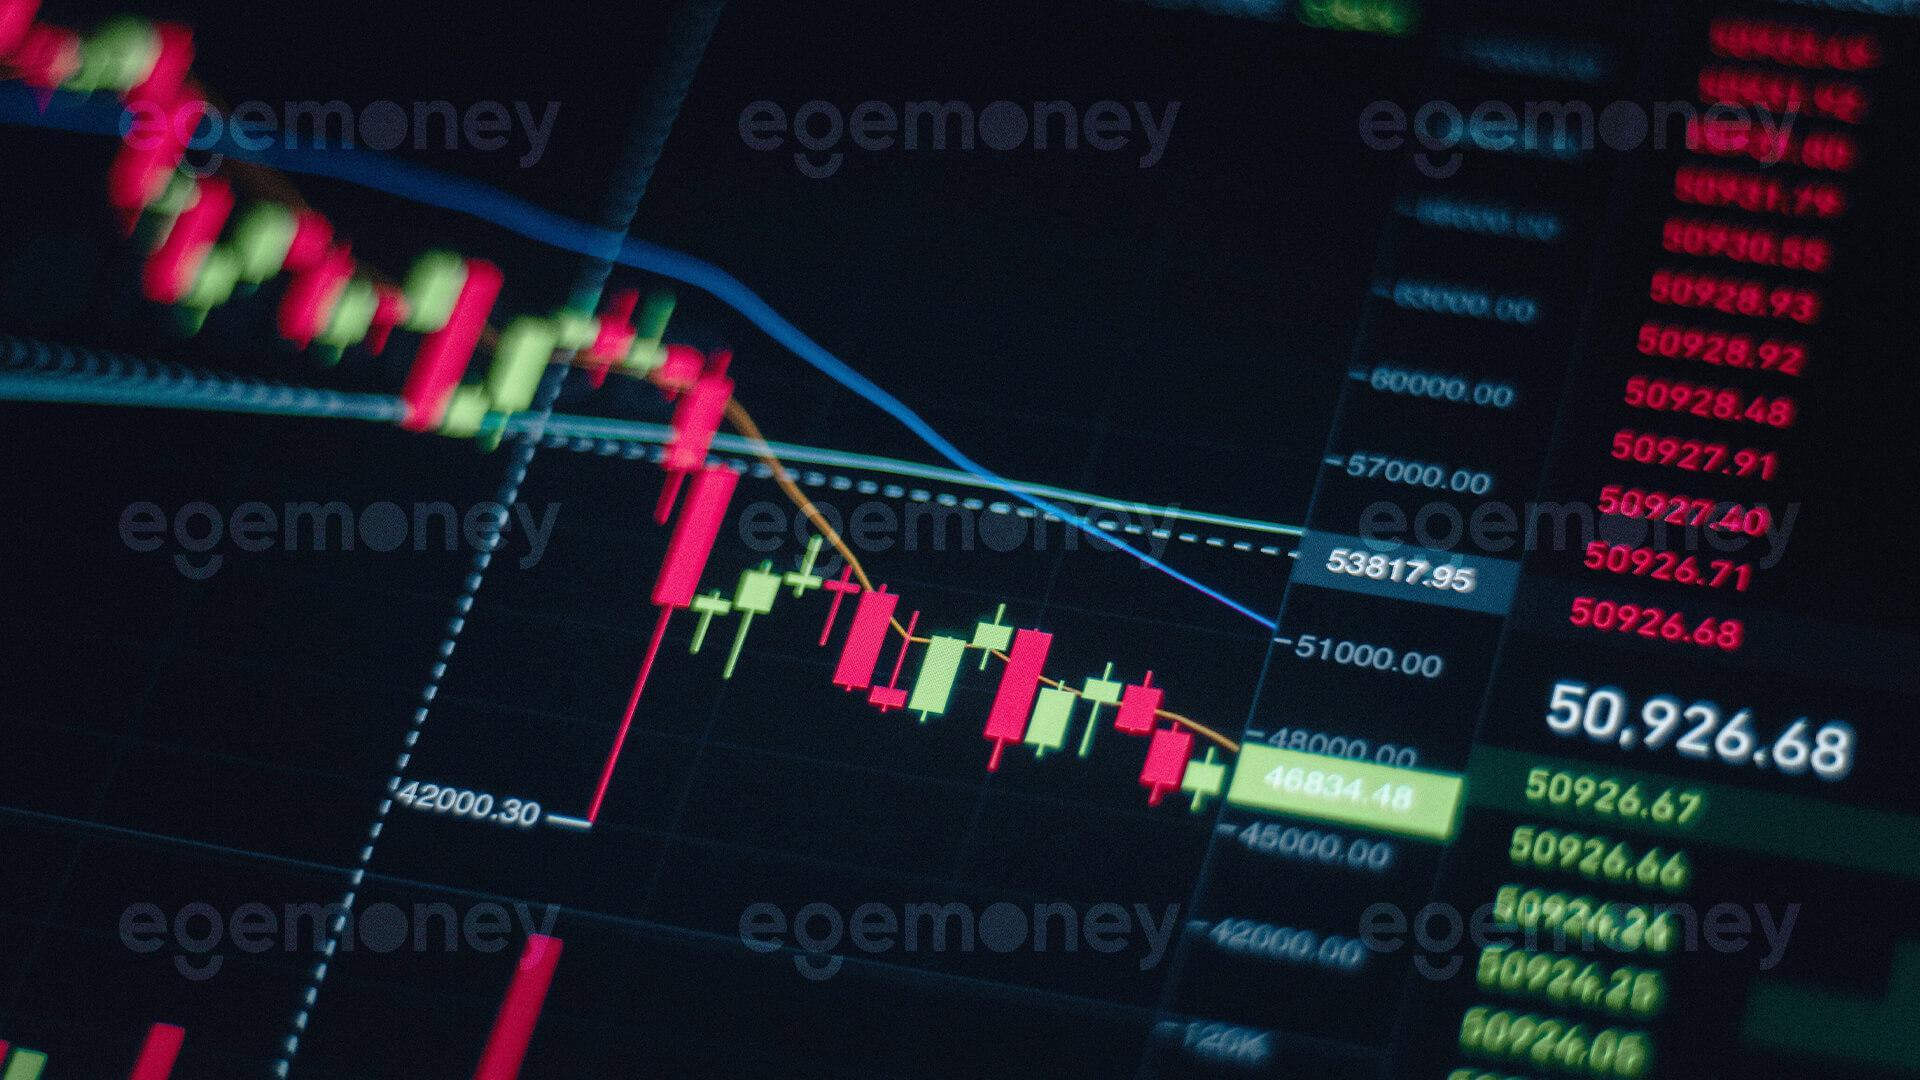 What is EgeMoney QuickView Charts and How to Use Them?